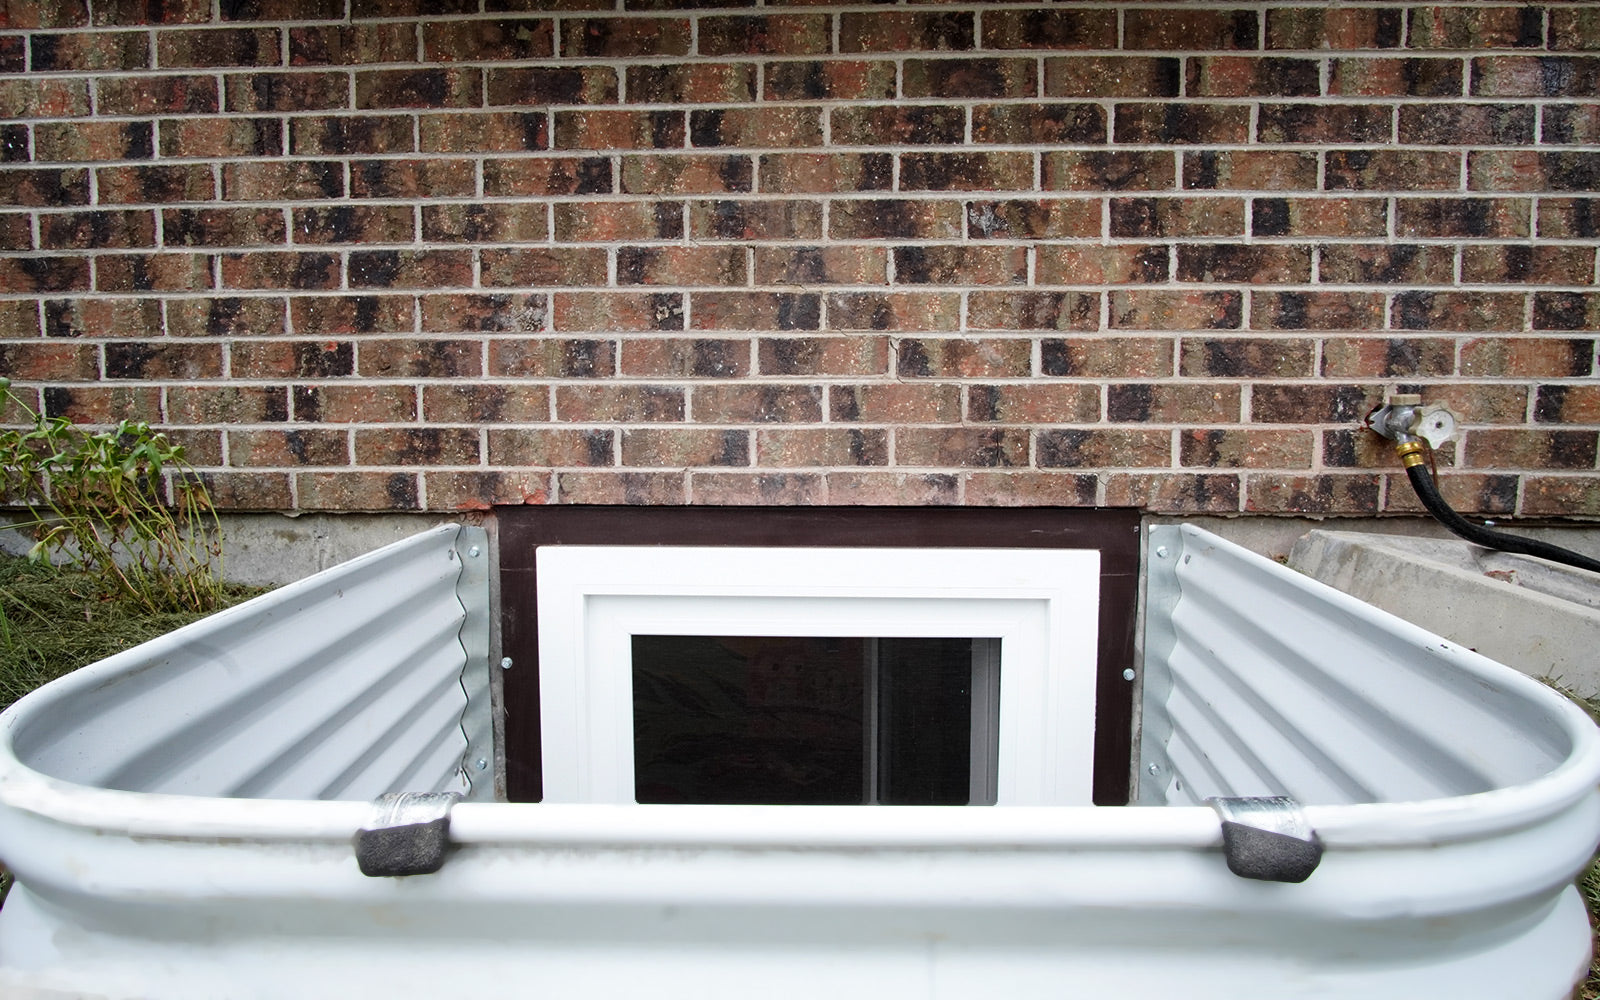 Why Inside Flanges on Window Wells Make Your Install Easier